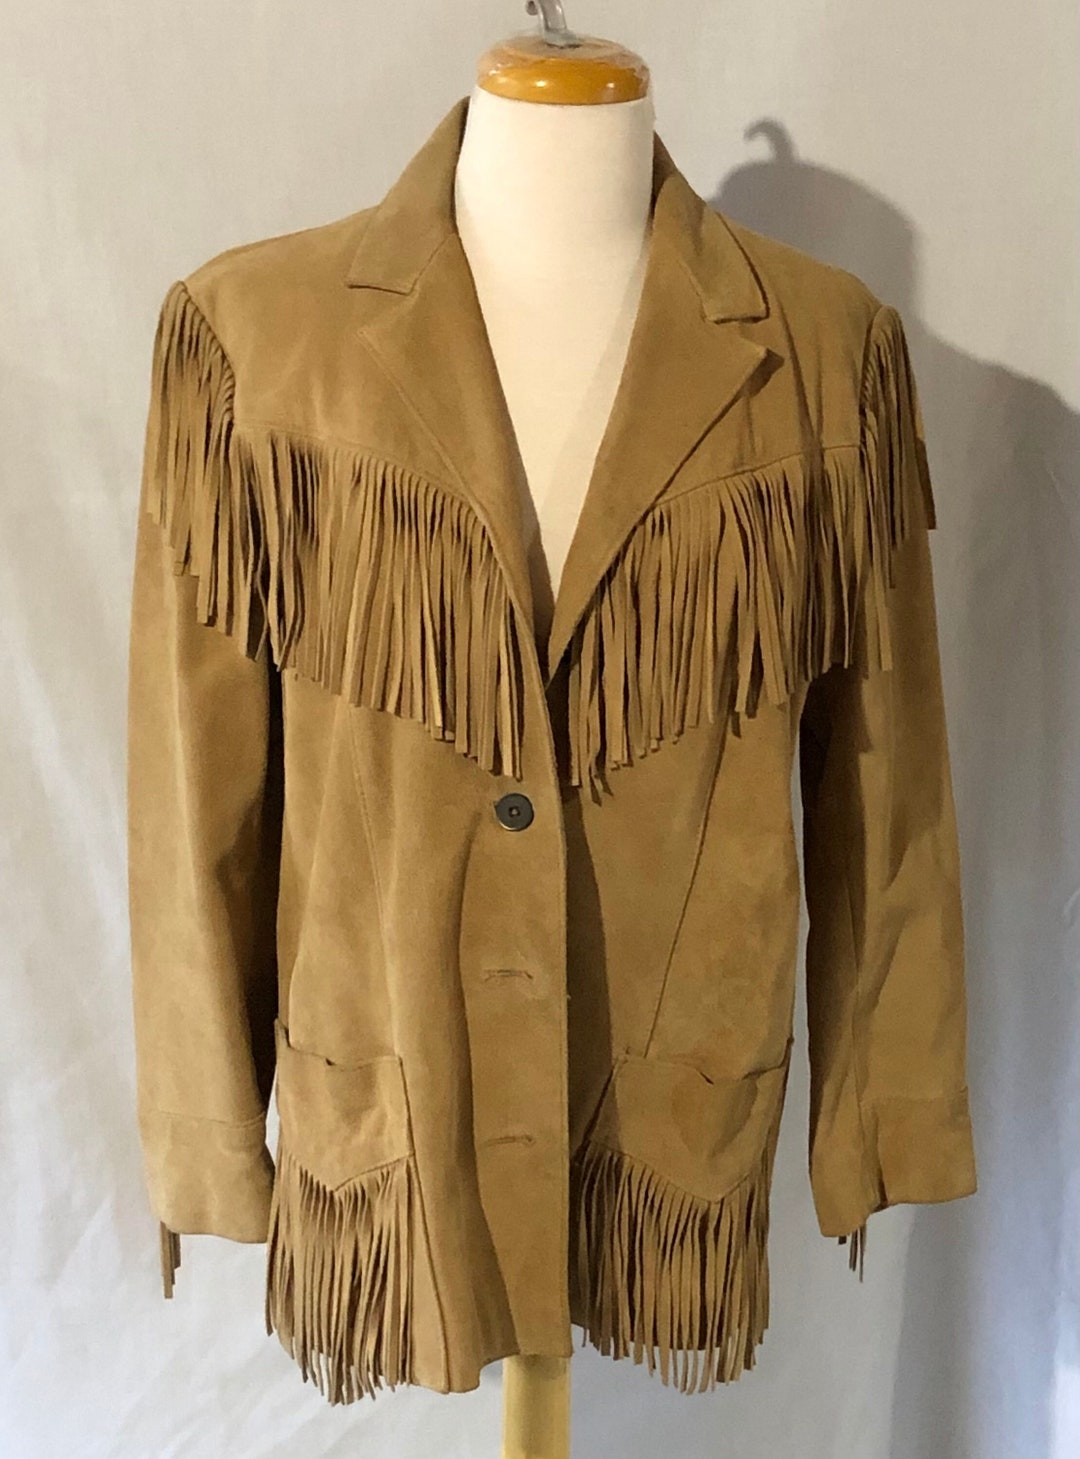 Sasson Vintage Heavy Suede Jacket Women Size 8 Tan Color With Leather ...